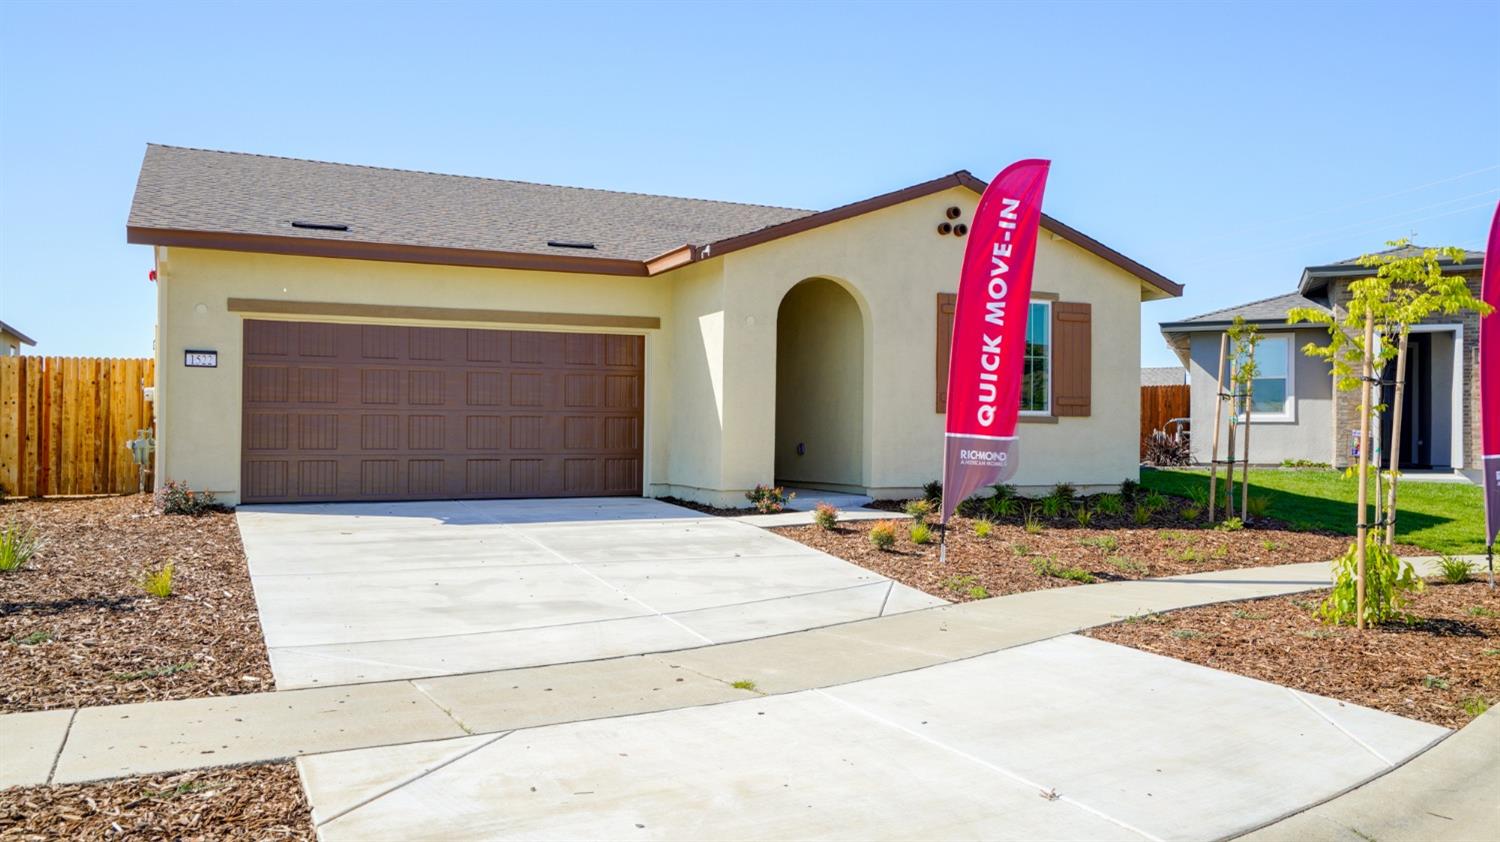 Photo of 1522 Egyptian Wy in Olivehurst, CA